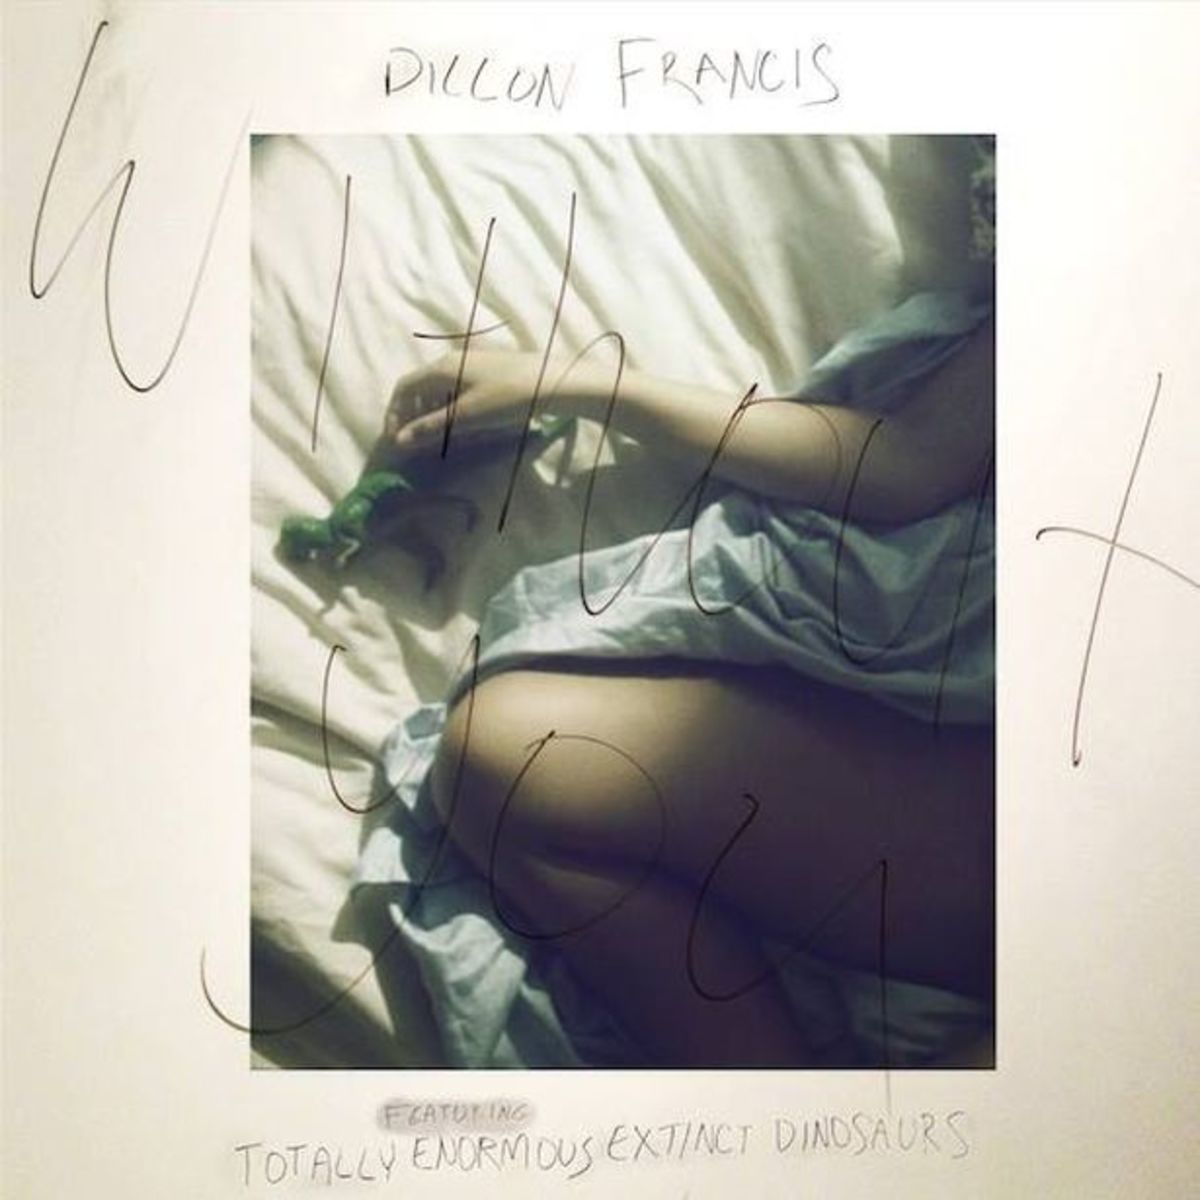 EDM News: New Electronic Music From Dillon Francis and Totally Enormous Extinct Dinosaurs Called "Without You"; Out Today